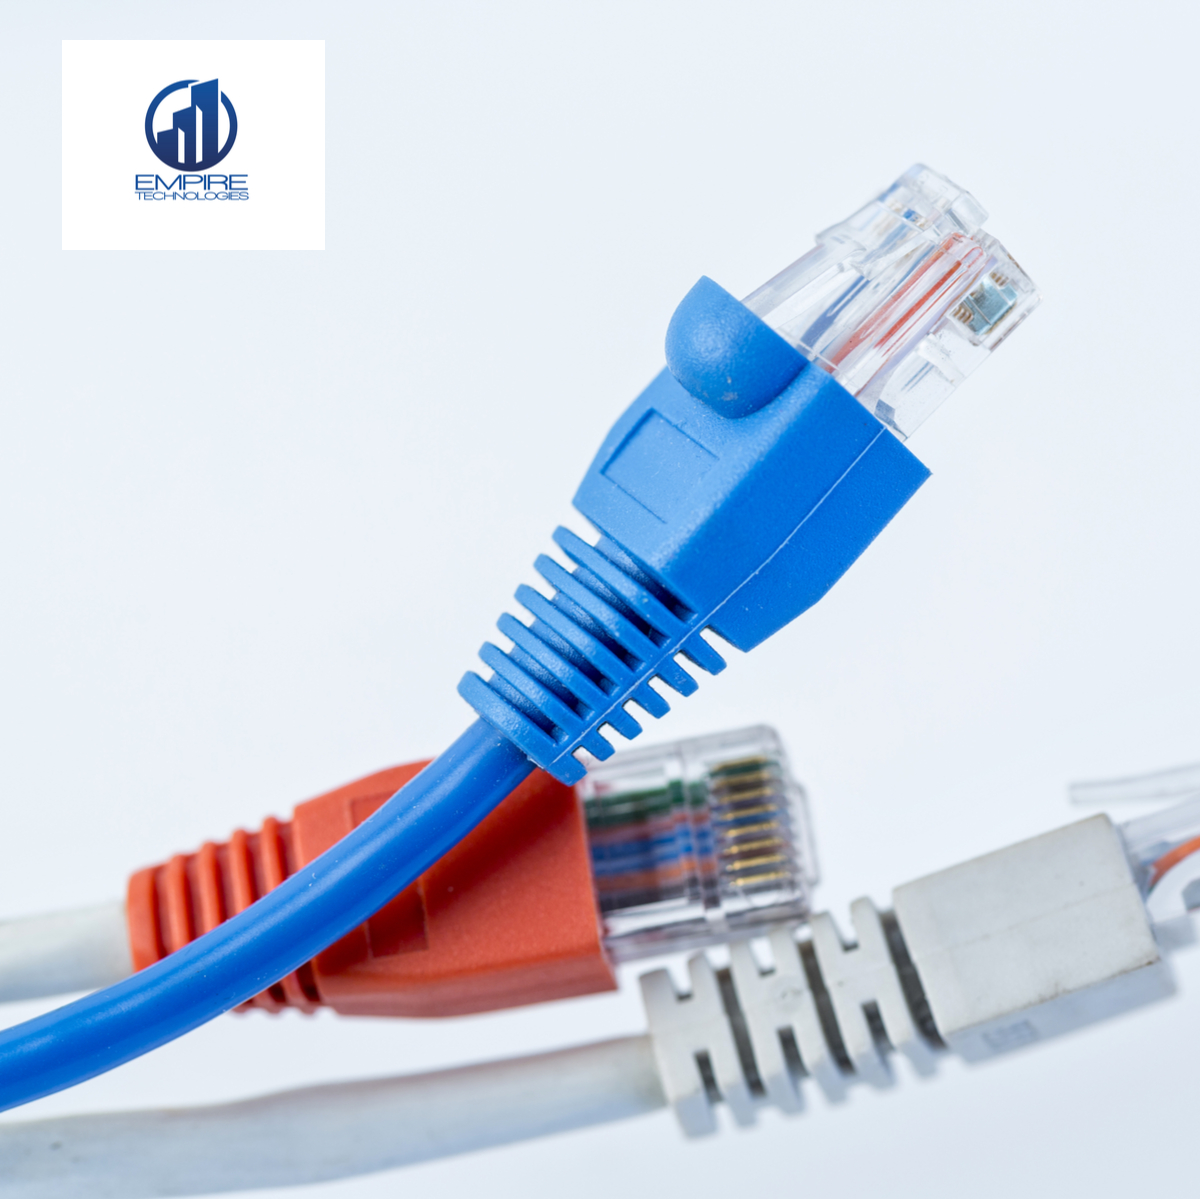 Many small businesses don’t know how to perform their network installation. As a result, many business owners need to rely on outside consultants or IT support services to keep their networks up and running. However, there are a few key steps that any small business owner can take to ensure that their network IT and cabling installation near Balch Springs is up to par.